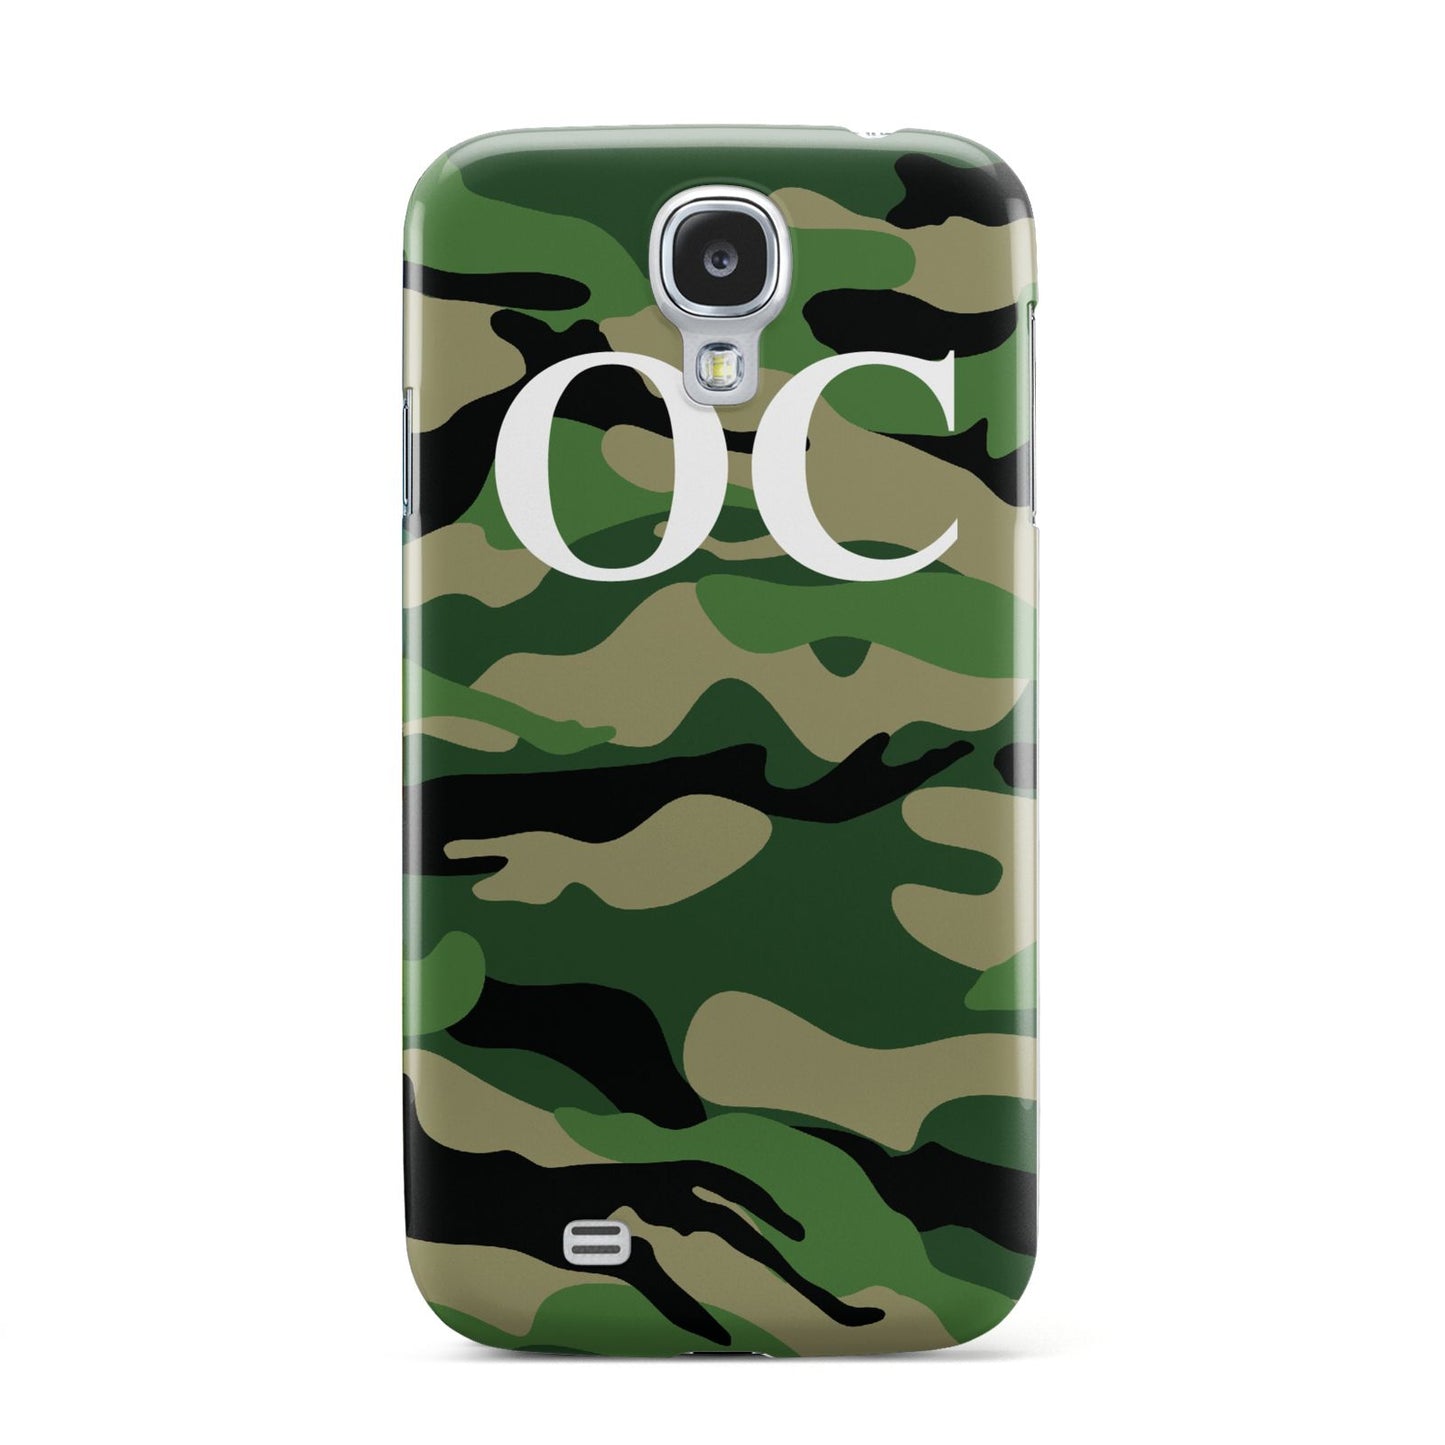 Personalised Camouflage Samsung Galaxy S4 Case